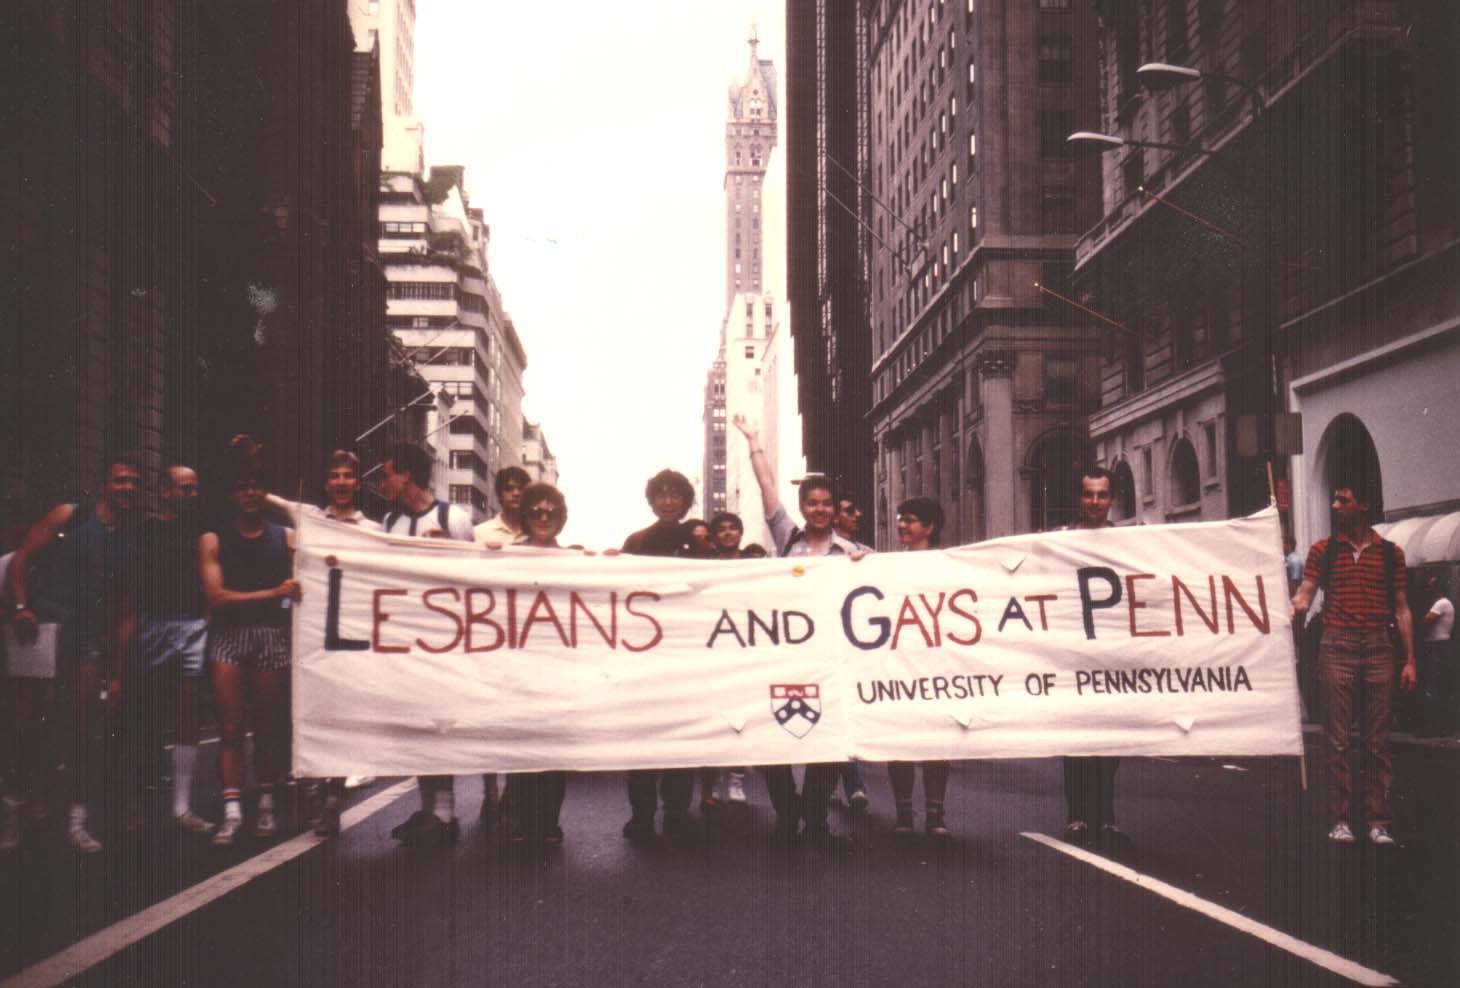 A group of people striding through Center City, Philadelphia carrying a banner that says "Lesbians and Gays at Penn"